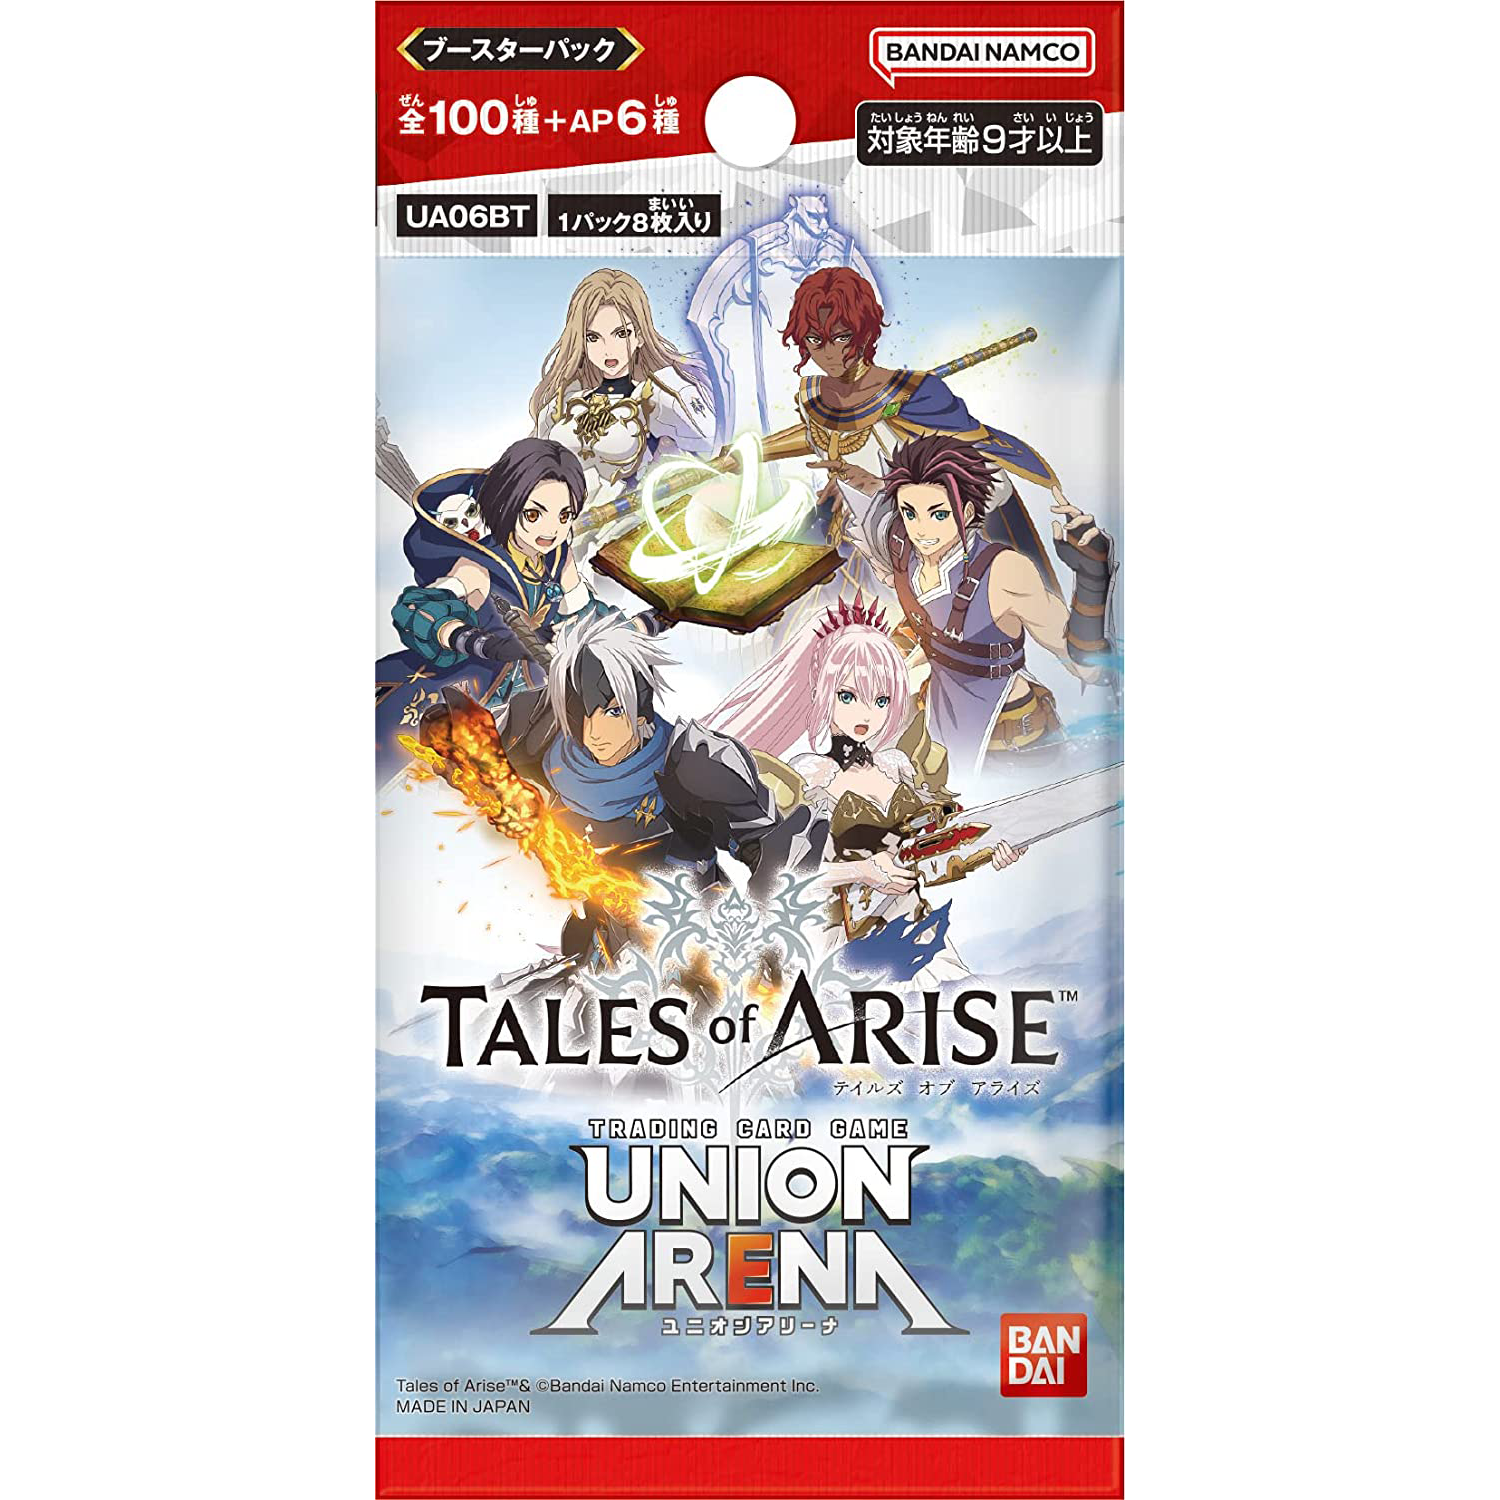 TRADING CARD GAME UNION ARENA [UA06BT] TALES of ARISE - Box